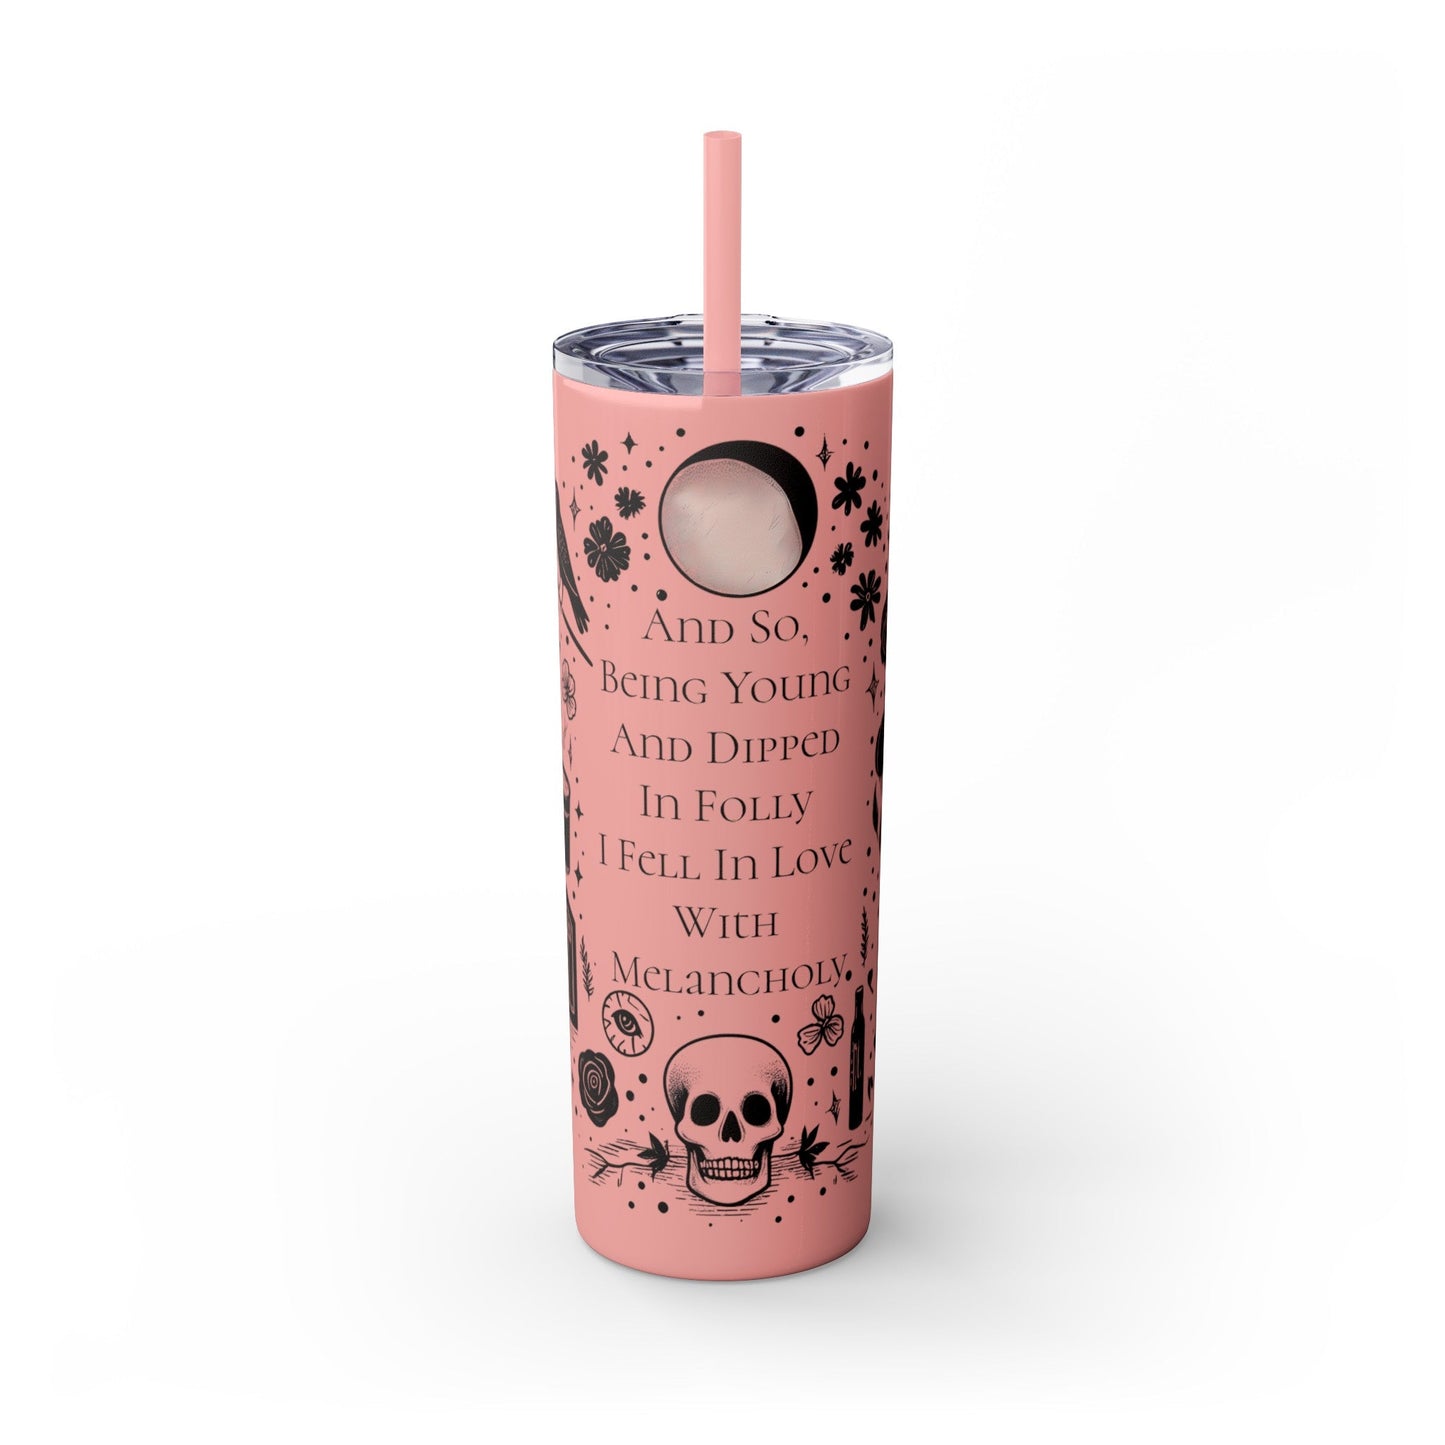 And So Being Young And Dipped In Folly I Fell In Love With Melancholy Skinny Tumbler with StrawMugVTZdesignsGlossyCarnation Pink20oz20 ozBottles & Tumblerscup